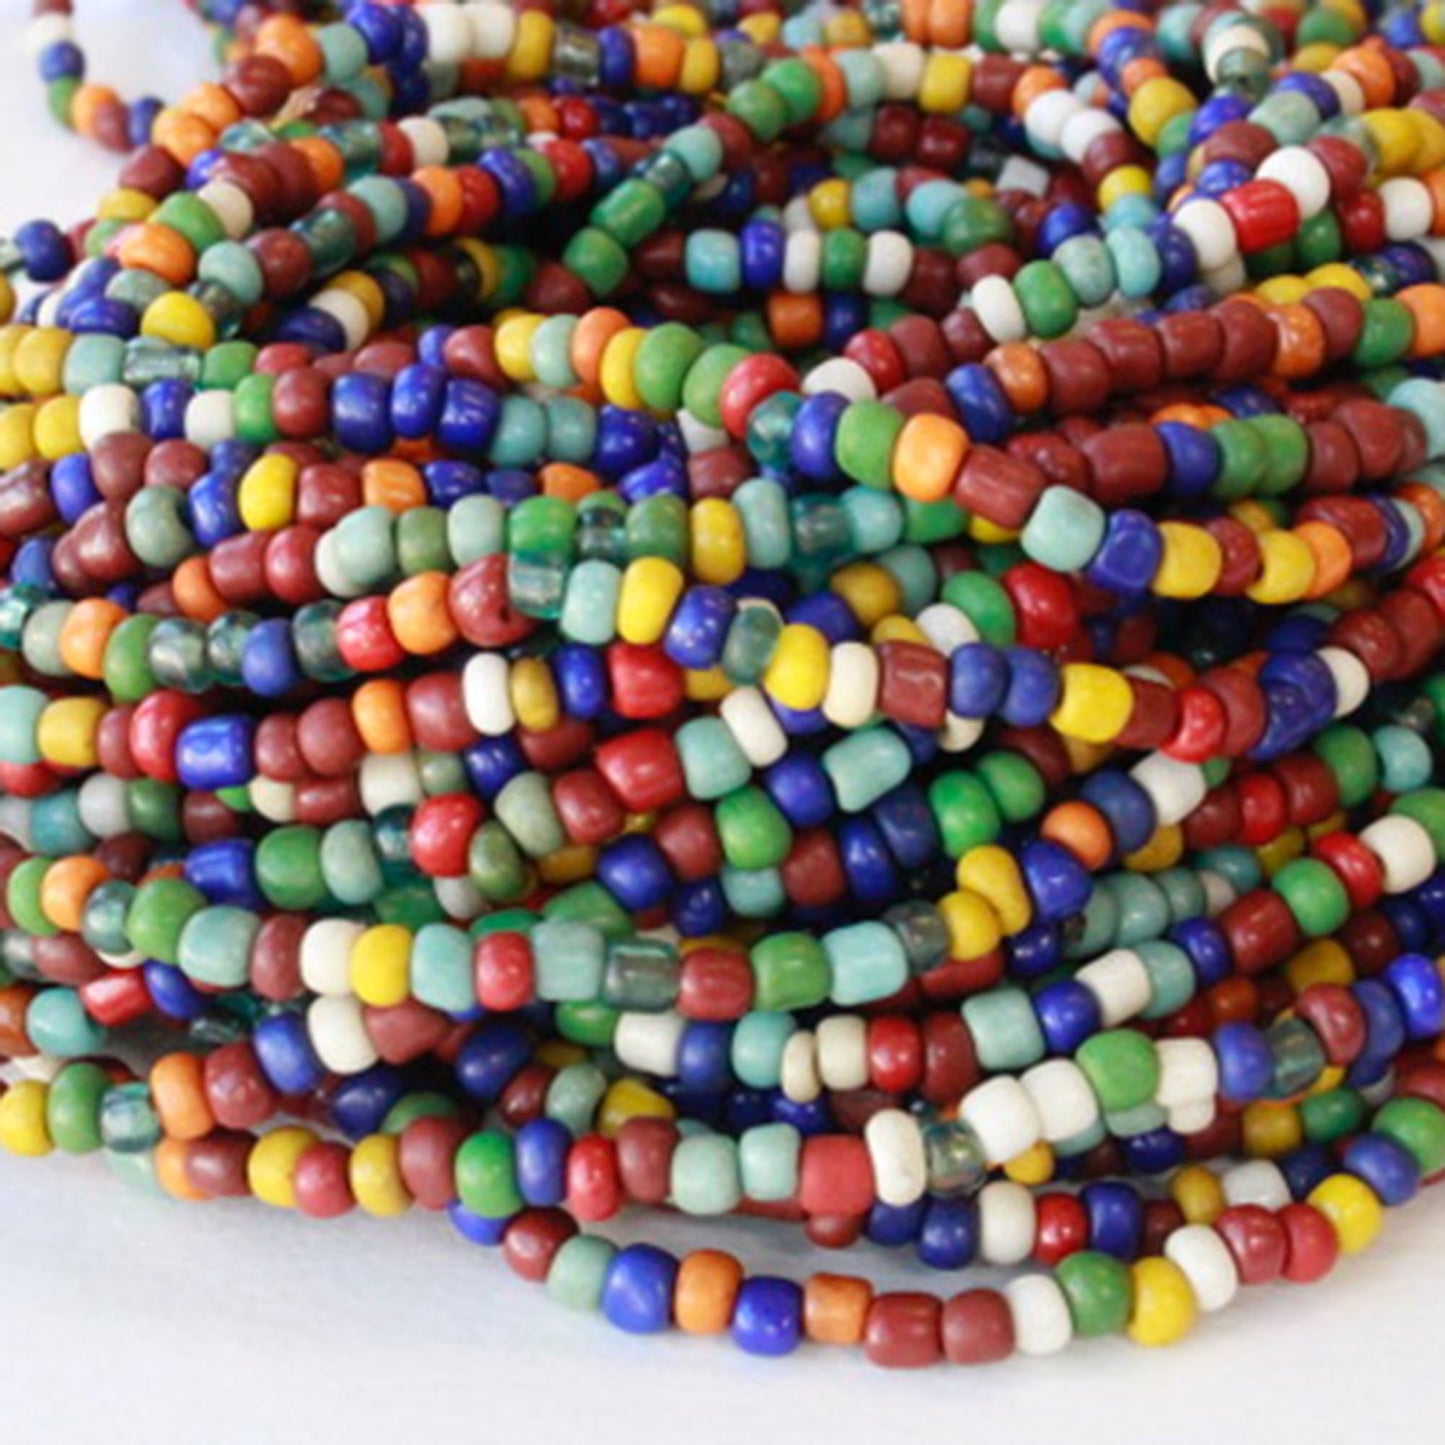 Rustic Indonesian Seed Beads - Jewel Tone Mix - 42 inches